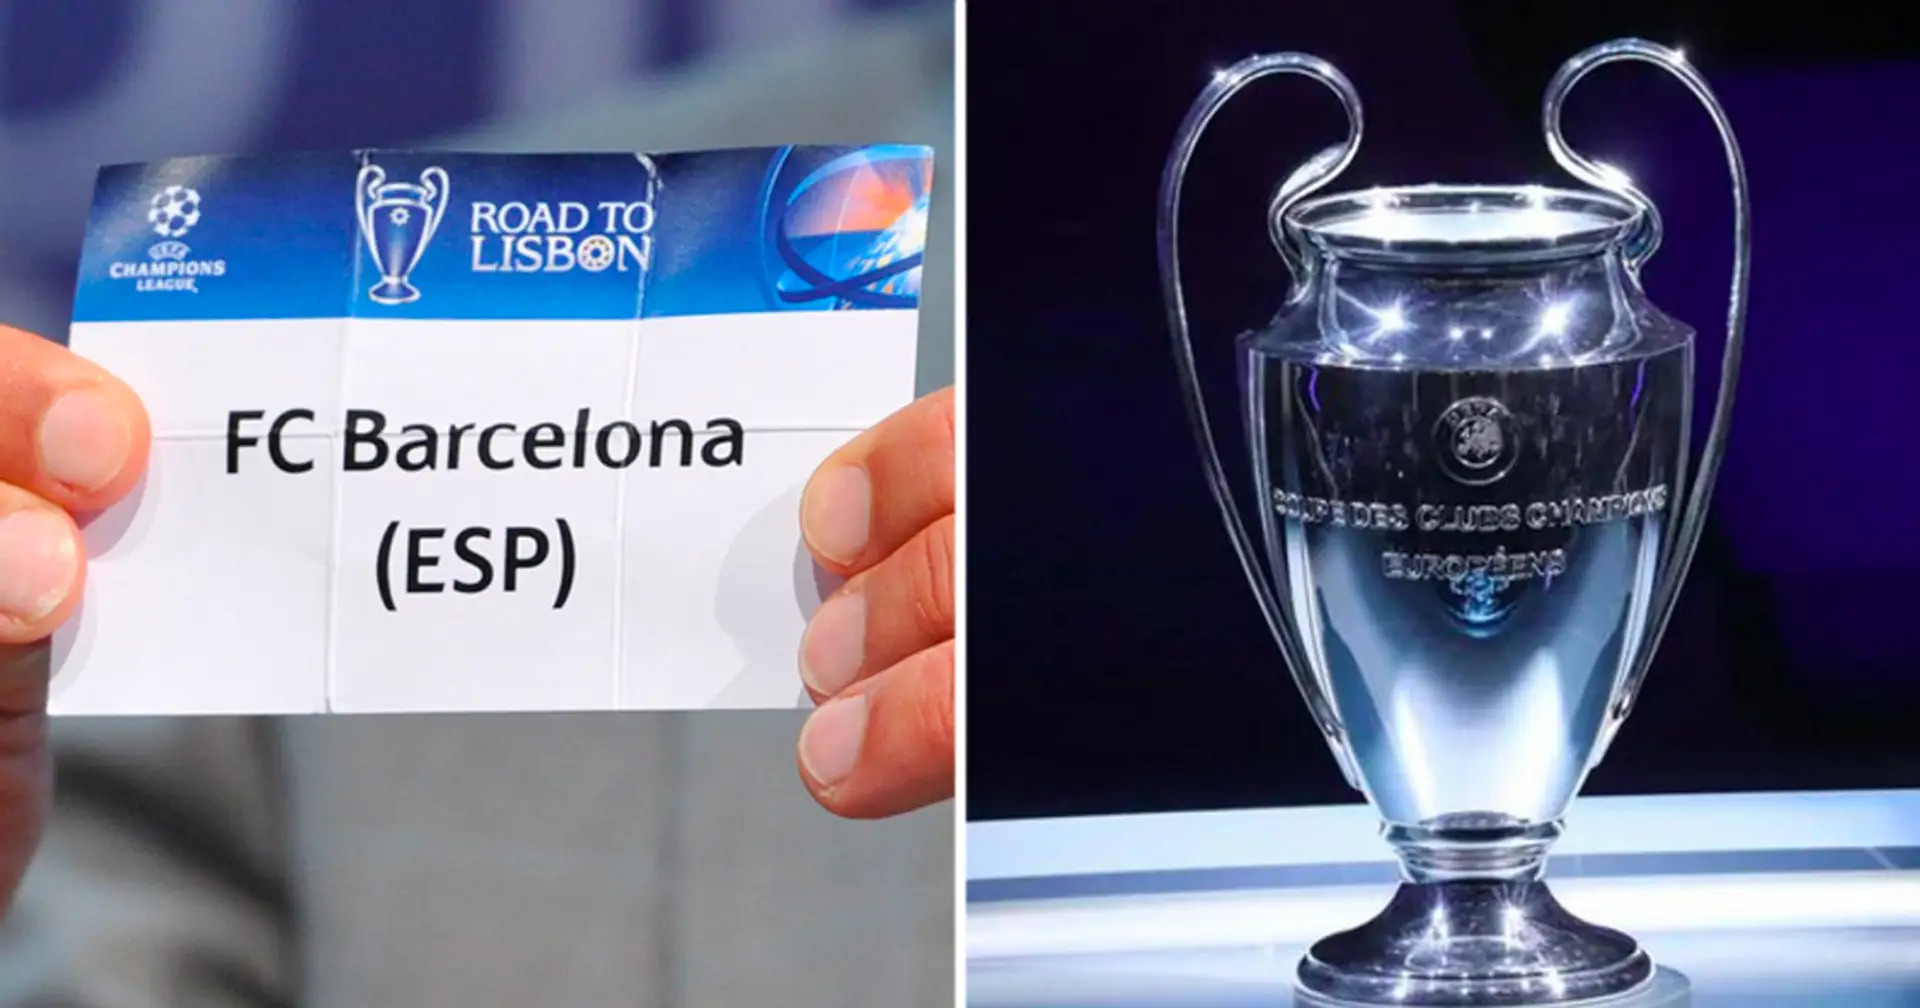 Barca to play Porto, Shakhtar and Antwerp in Champions League group